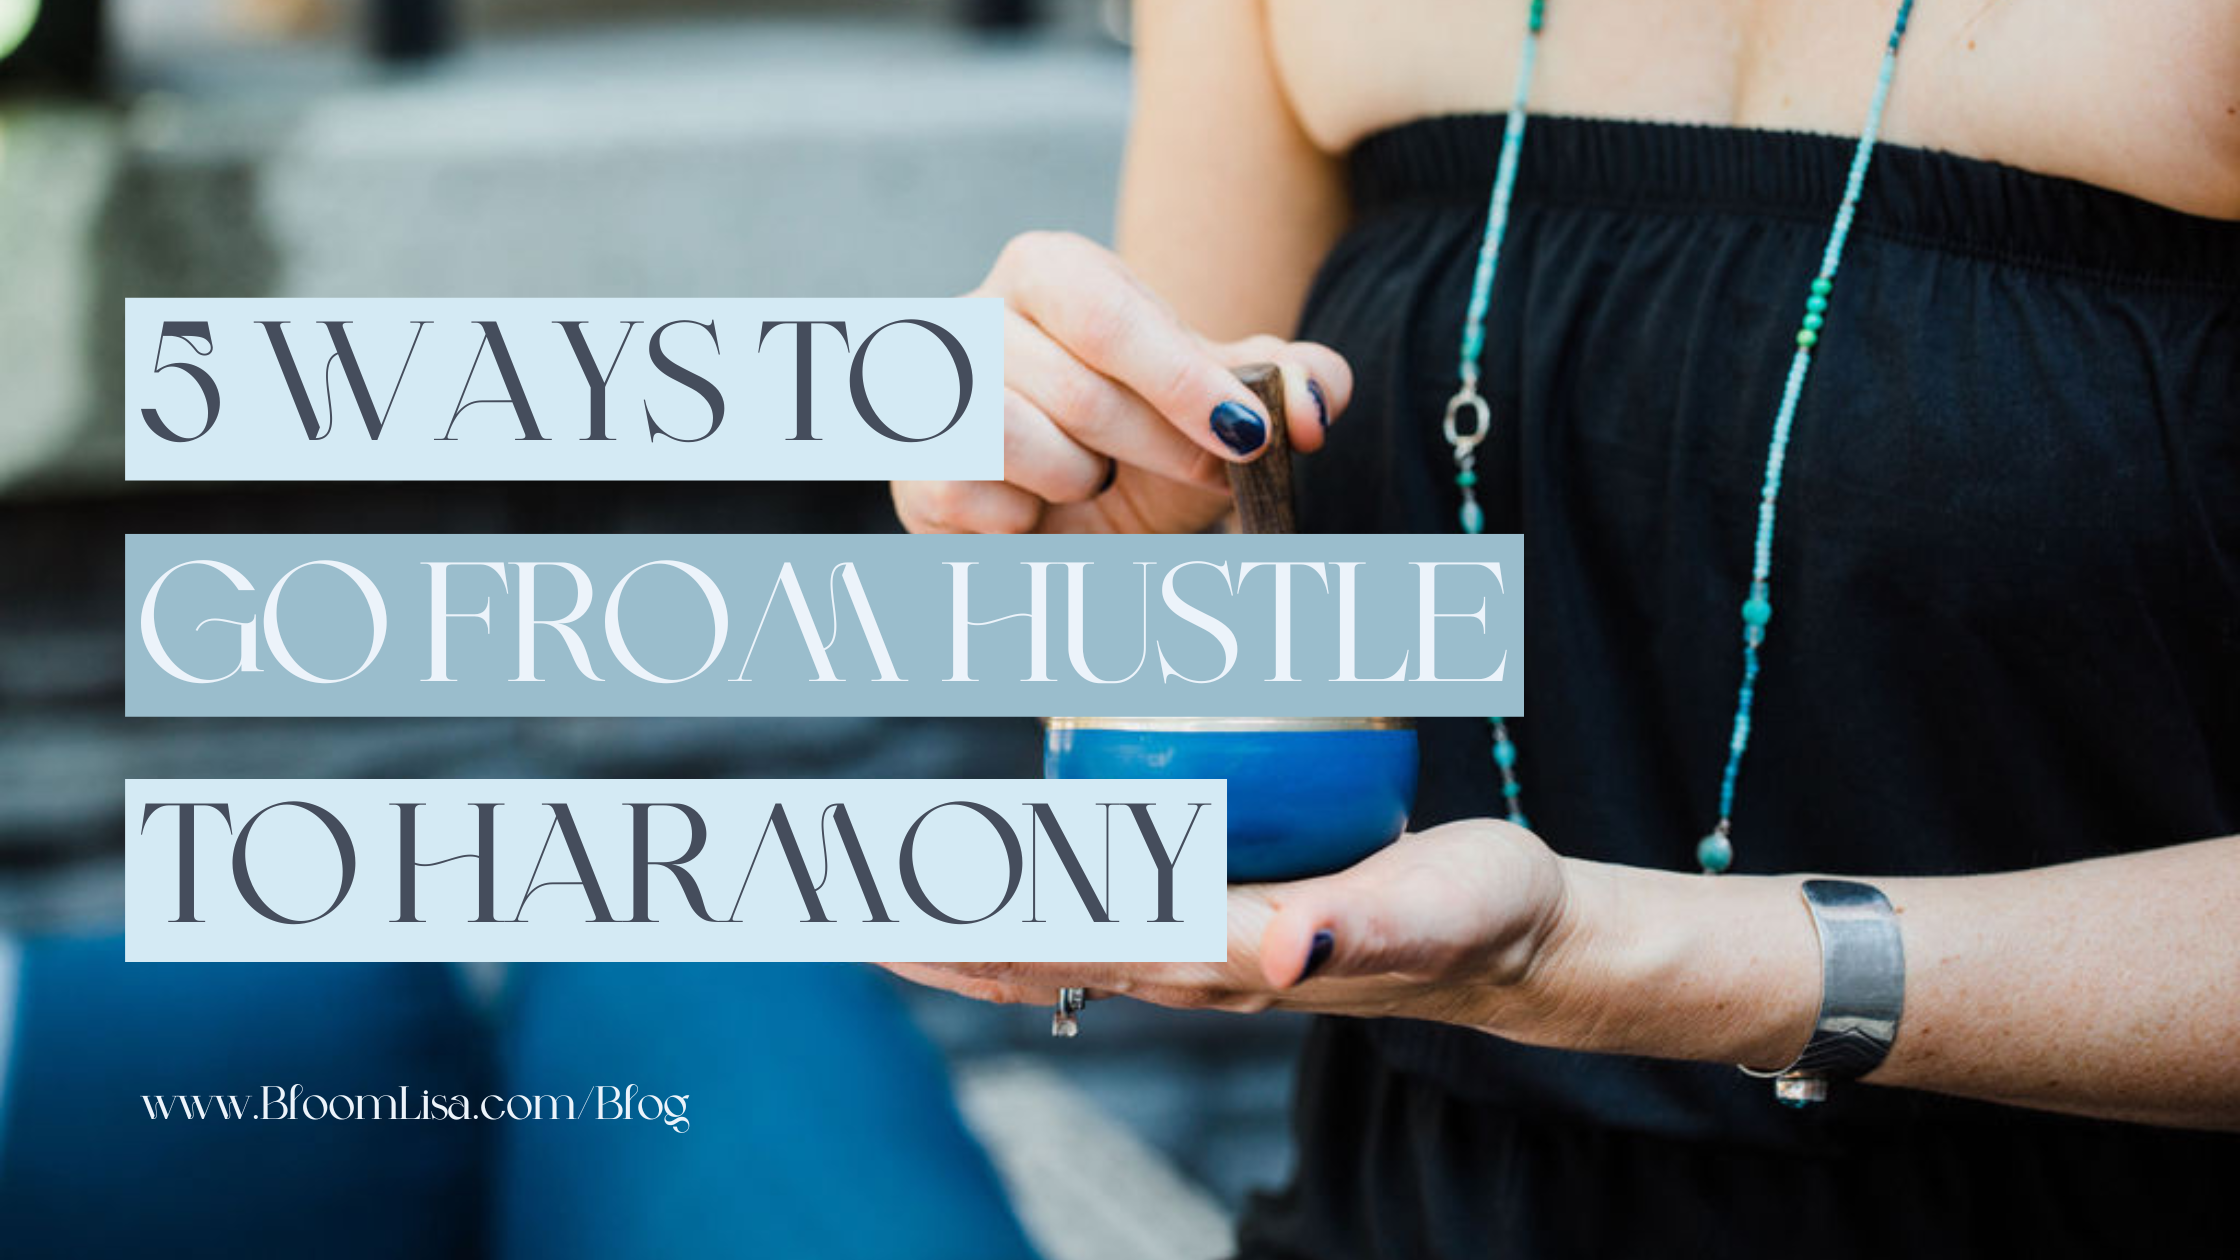 A holistic business blog by Lisa van Reeuwyk, Five Ways to Drop Hustle Culture for Harmony.